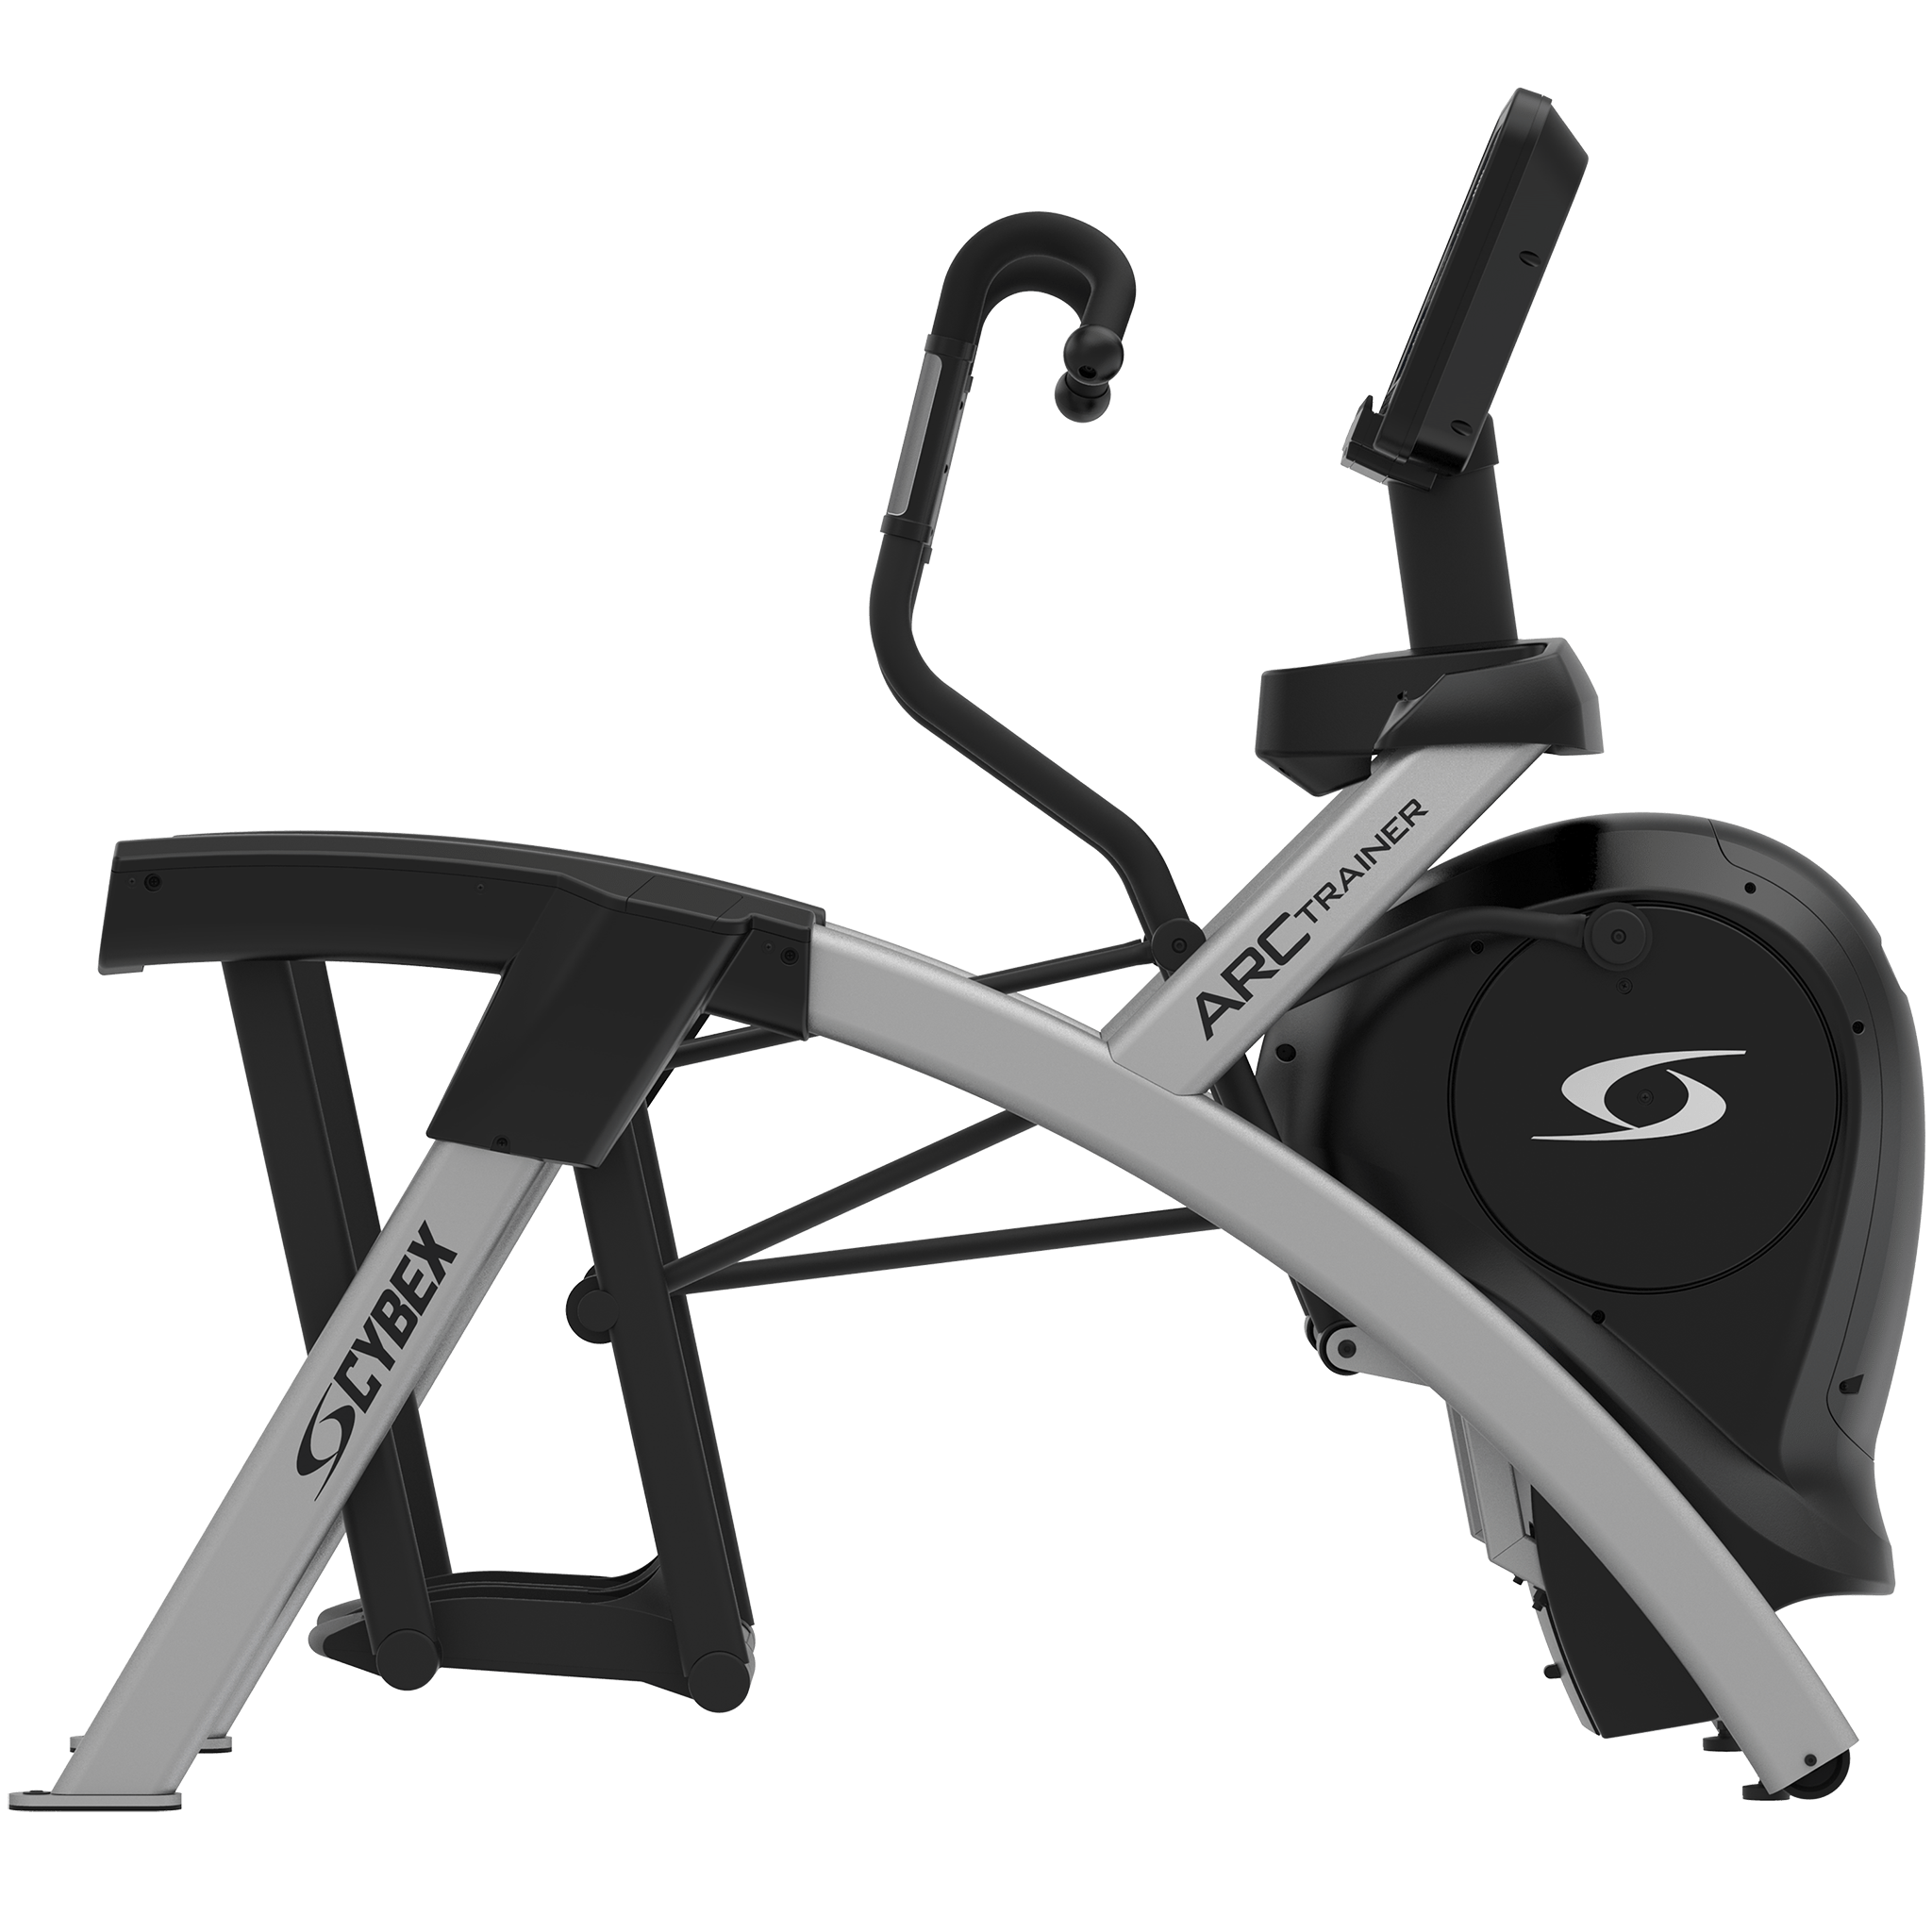 Cybex R Series Total Body Arc Trainer with 70T Touch Screen Display